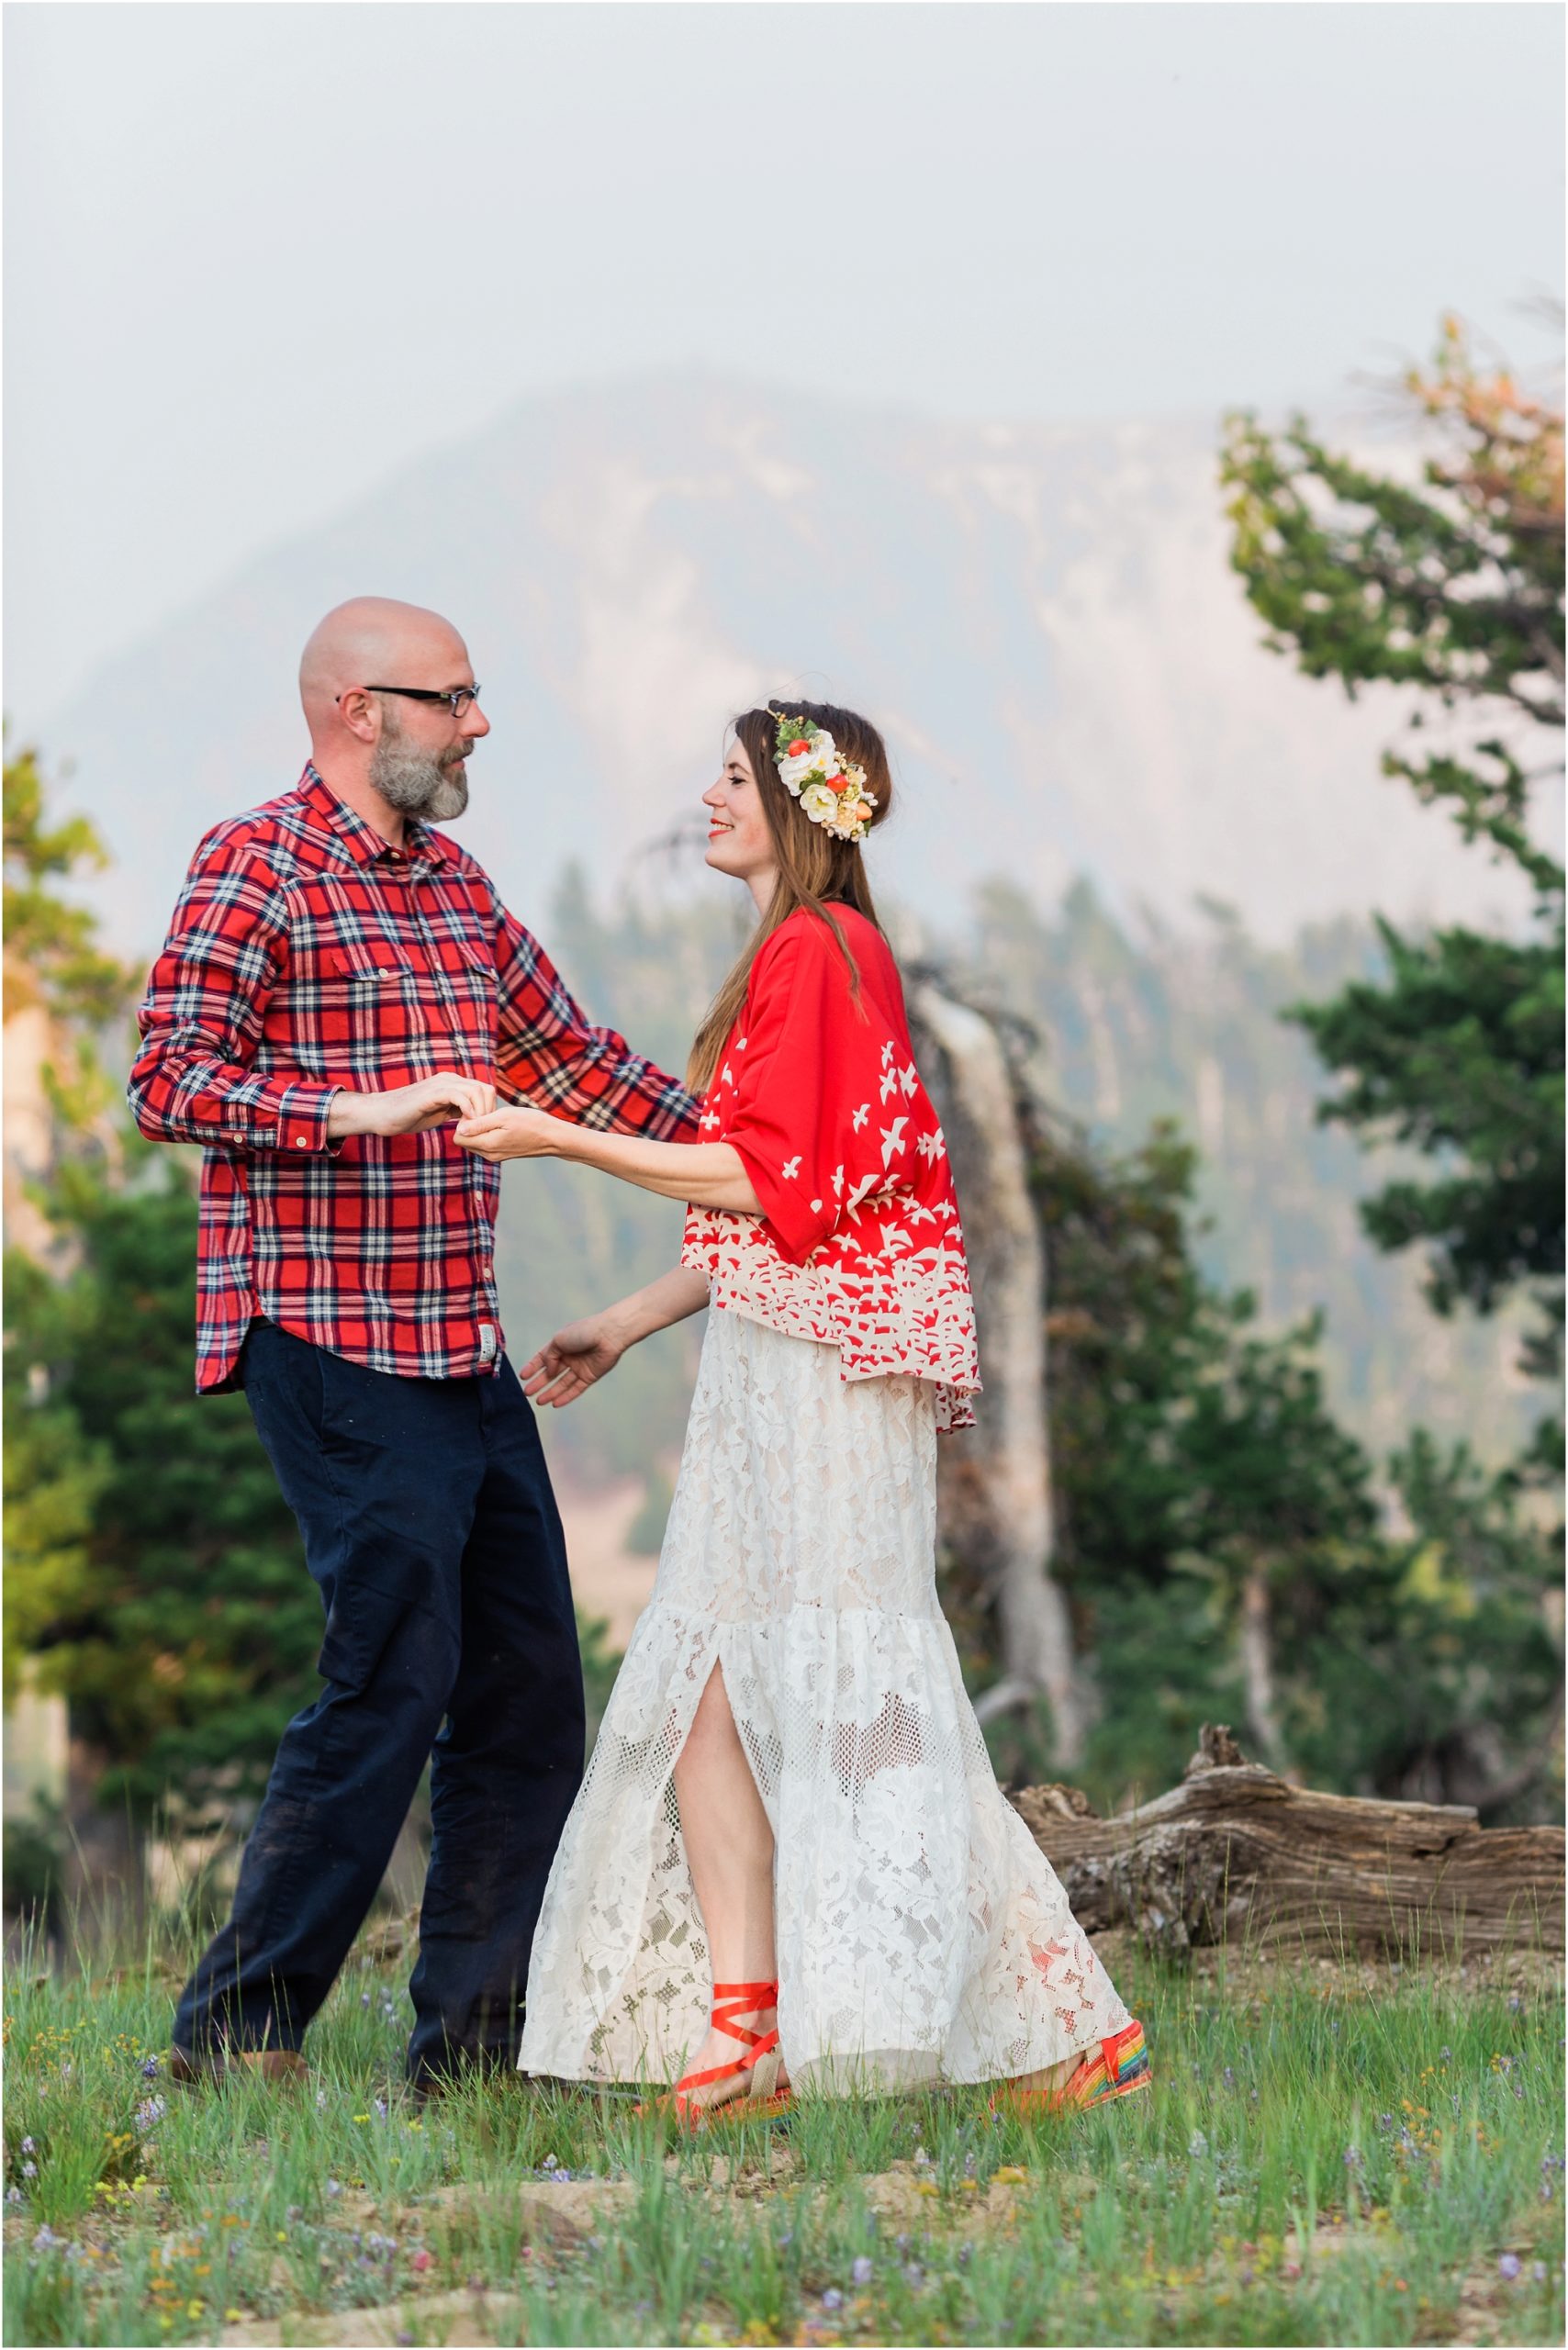 A couple practices their first dance for their romantic wedding portraits at Crater Lake in Oregon. | Erica Swantek Photography